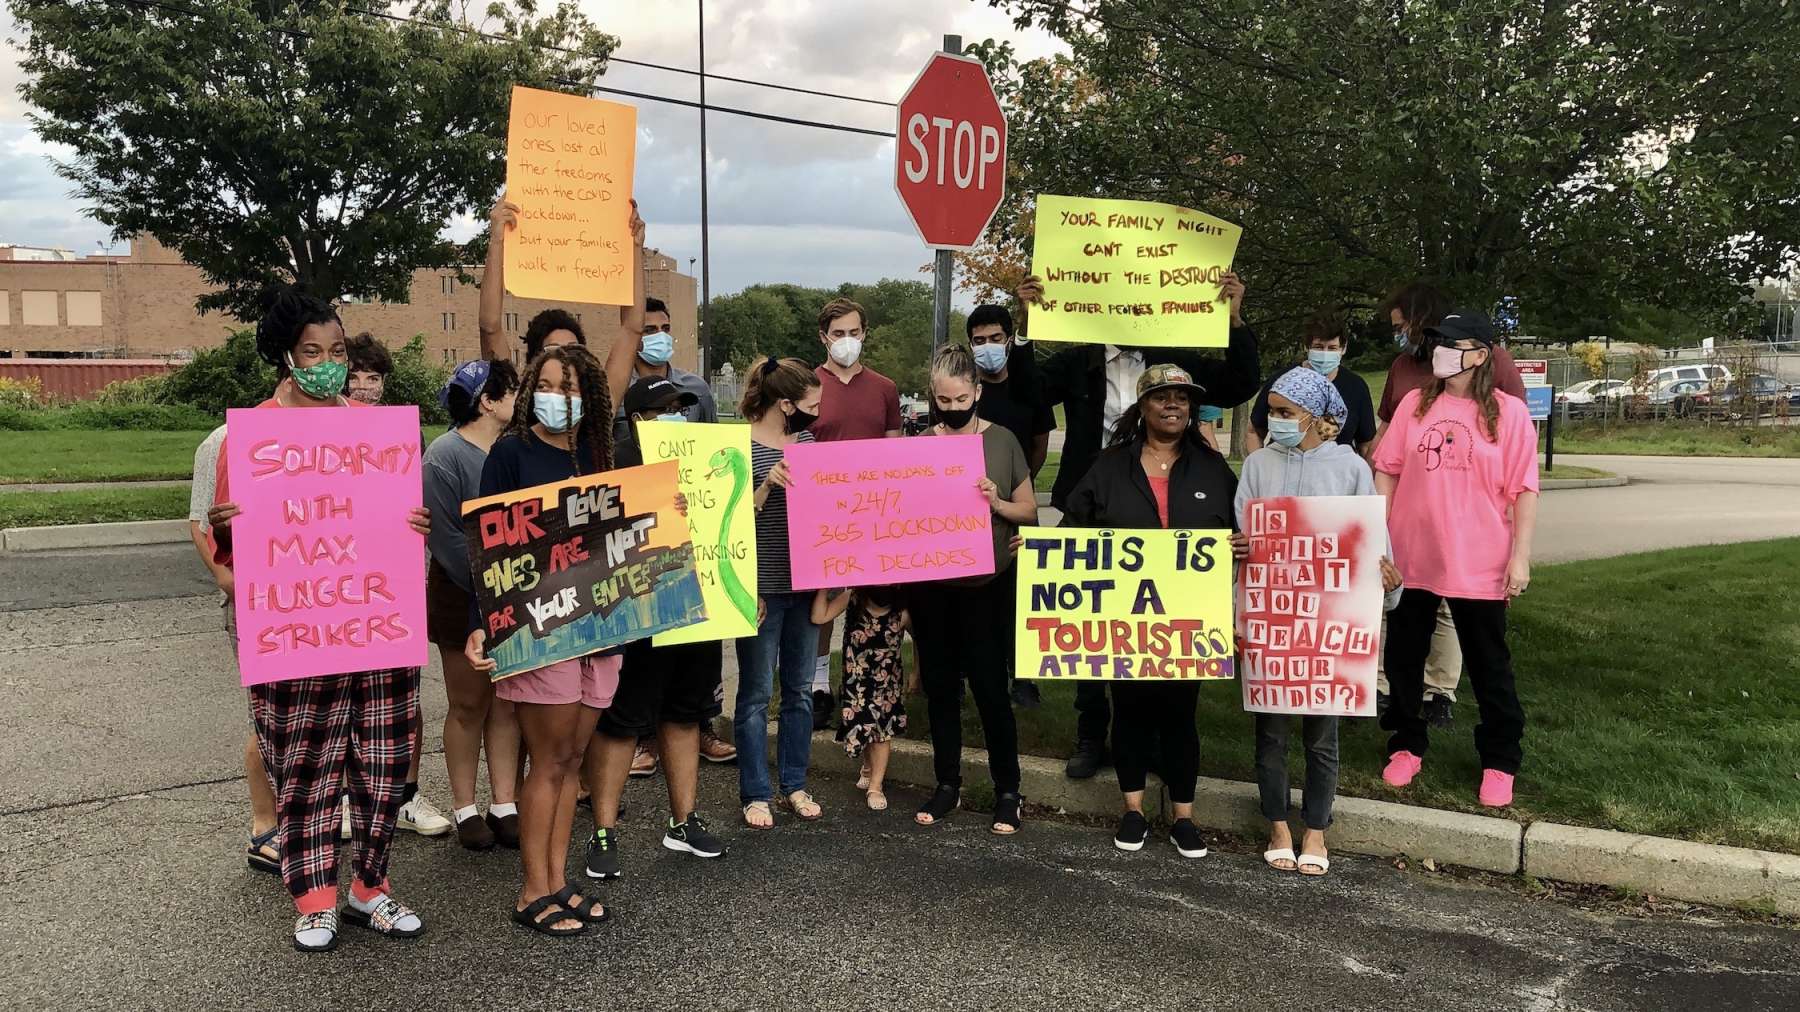 Rhode Island News: Protesters object to prison tours that treat the incarcerated as zoo animals